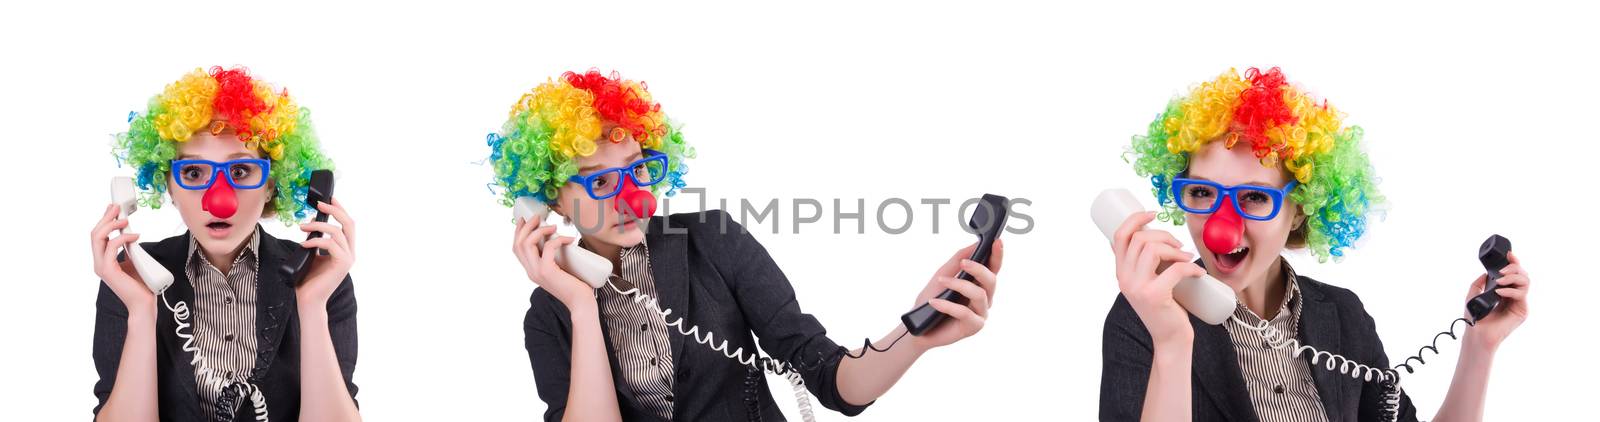 Businessman with clown wig isolated on white